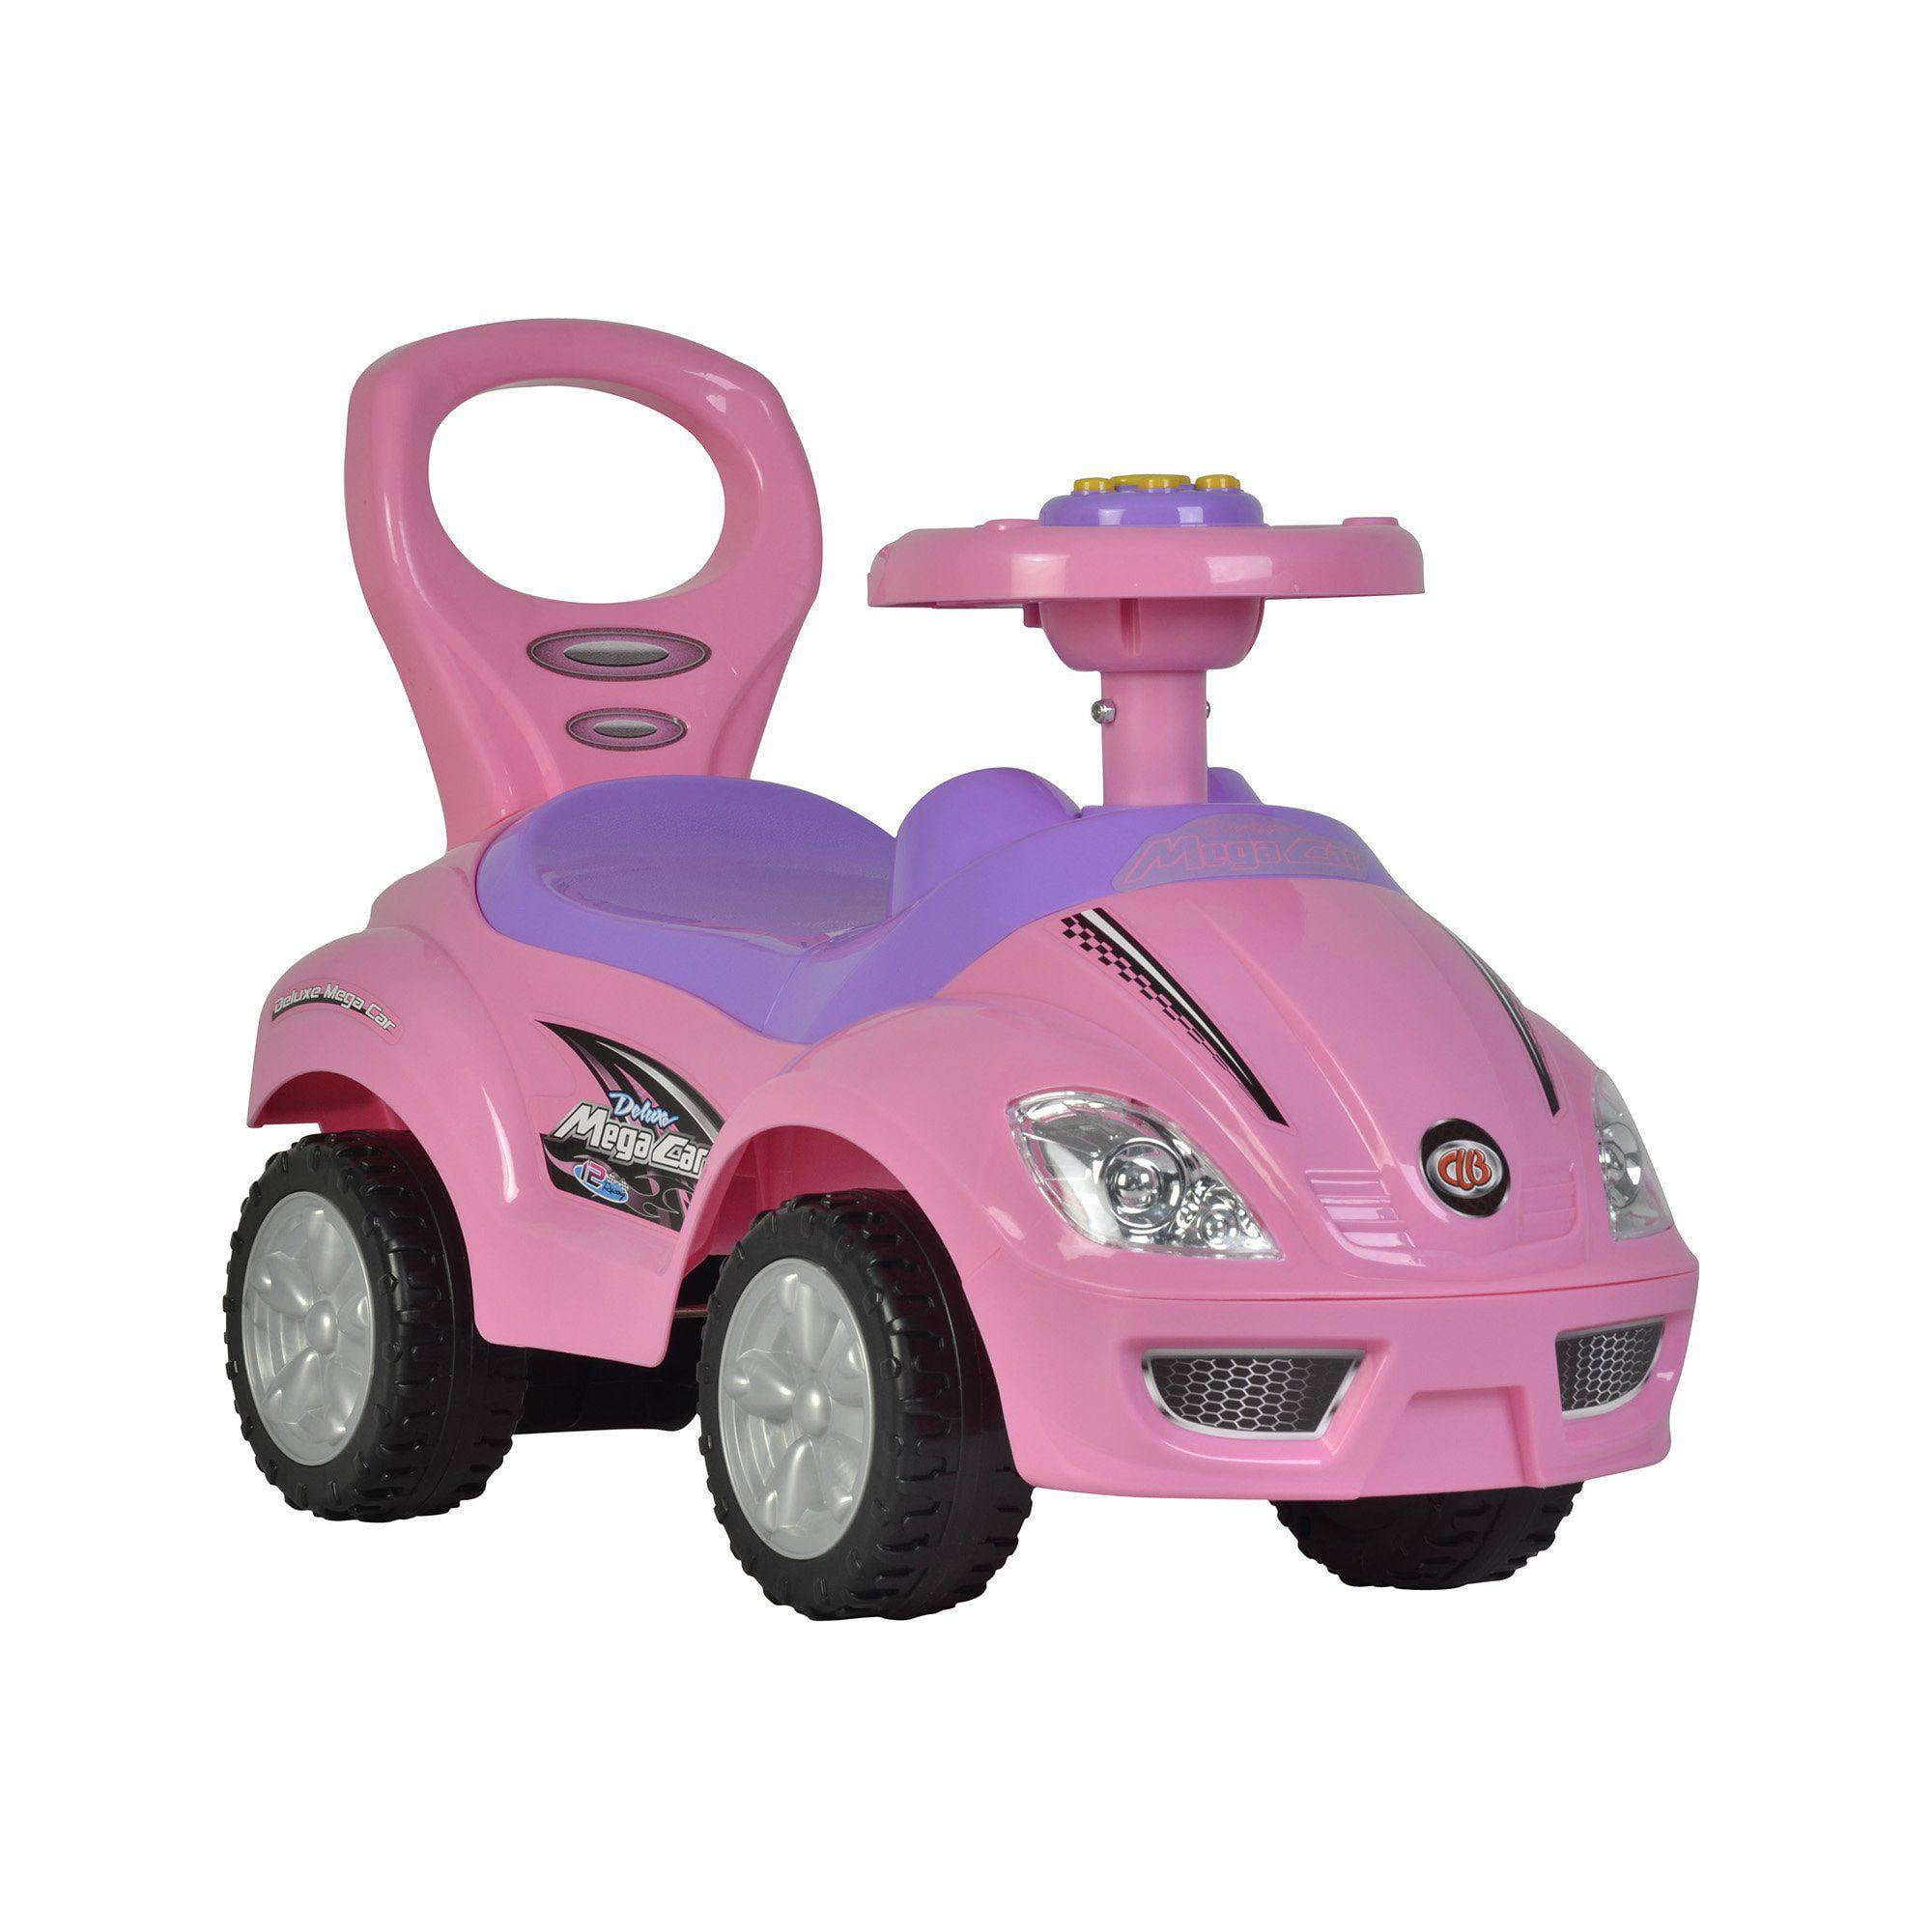 10th Anniversary Edition wowStep2 Push Around Buggy Ride On